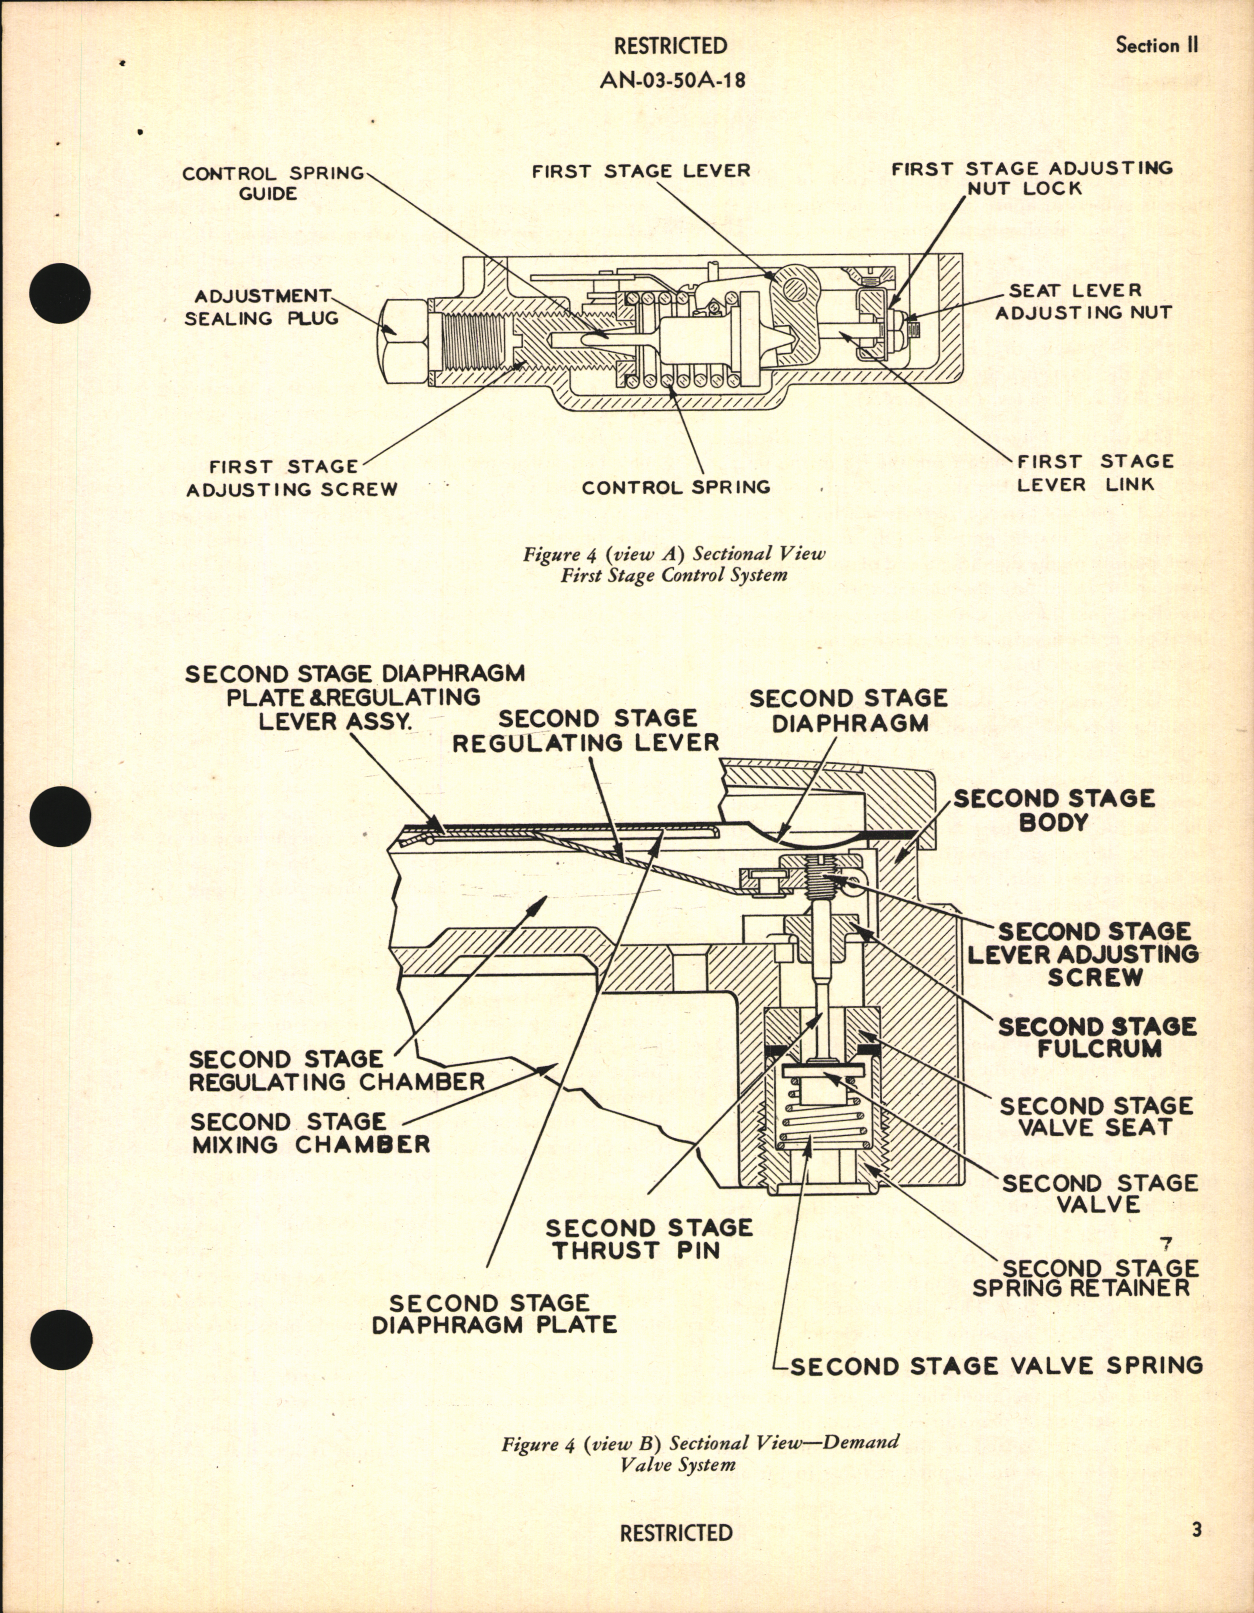 Sample page 7 from AirCorps Library document: Handbook of Instructions with Parts Catalog for Type AN 6004-1 Diluter Demand Oxygen Regulator